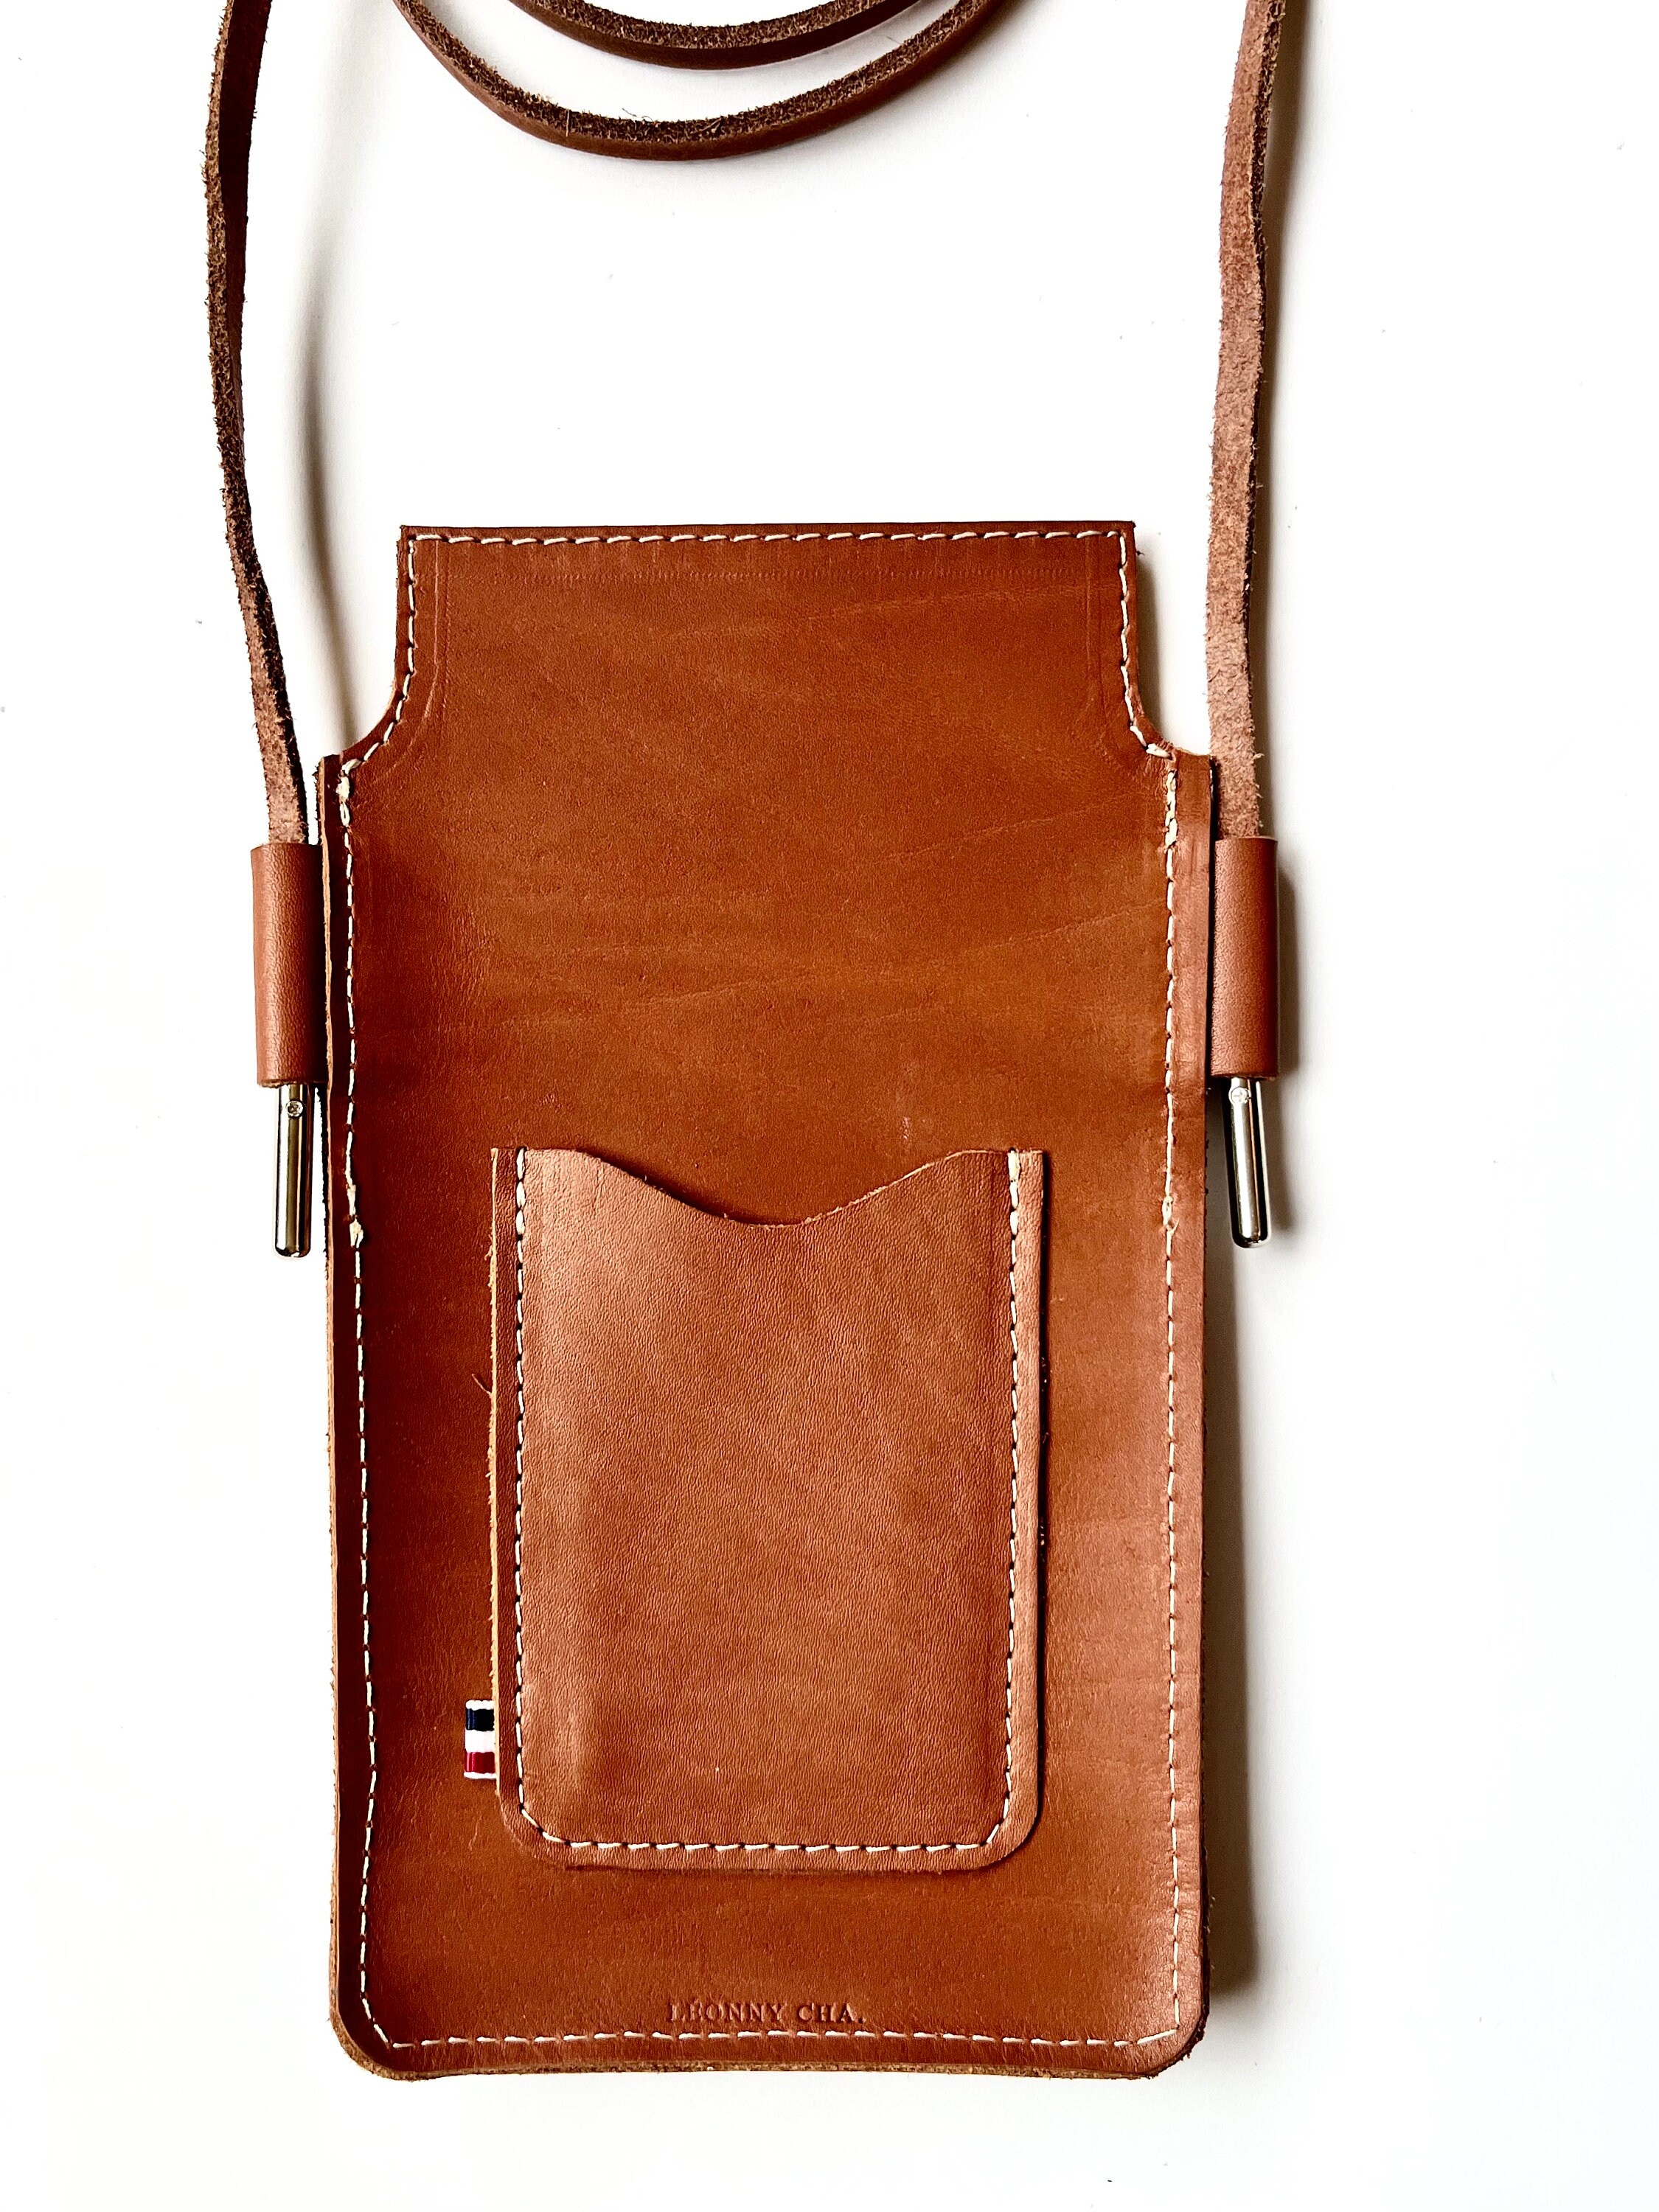 Bespoke Phone Pouch on Strap